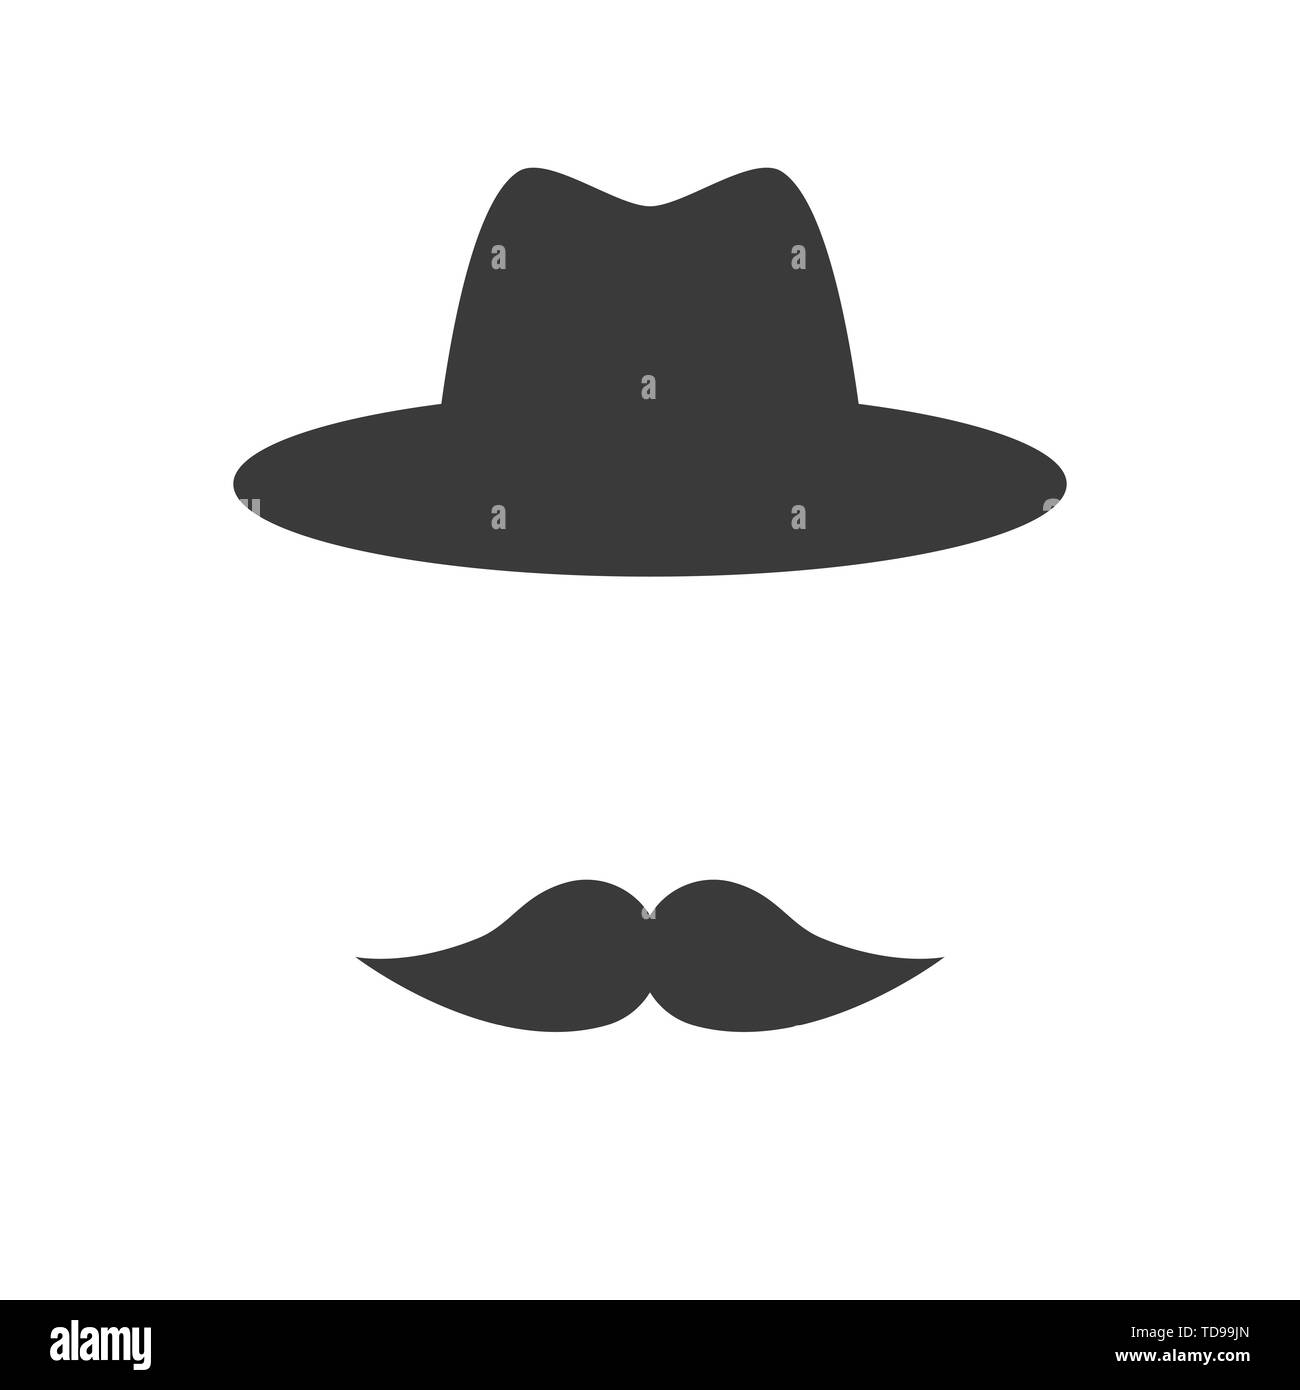 Mustache with hat icons. Gentlemans icons face Stock Vector